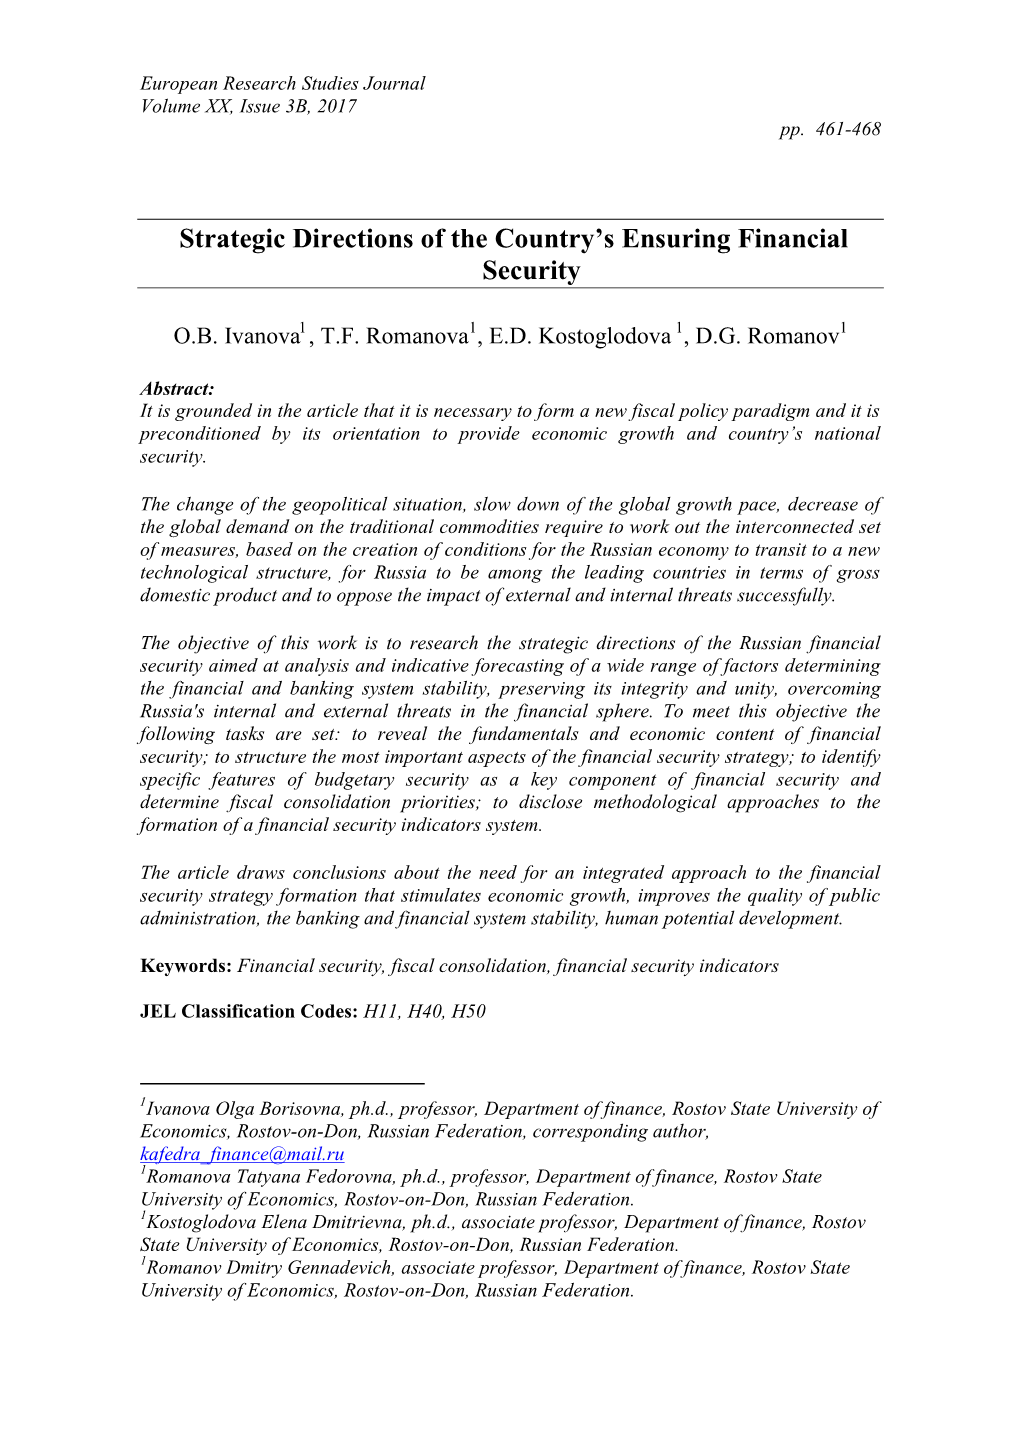 Strategic Directions of the Country's Ensuring Financial Security